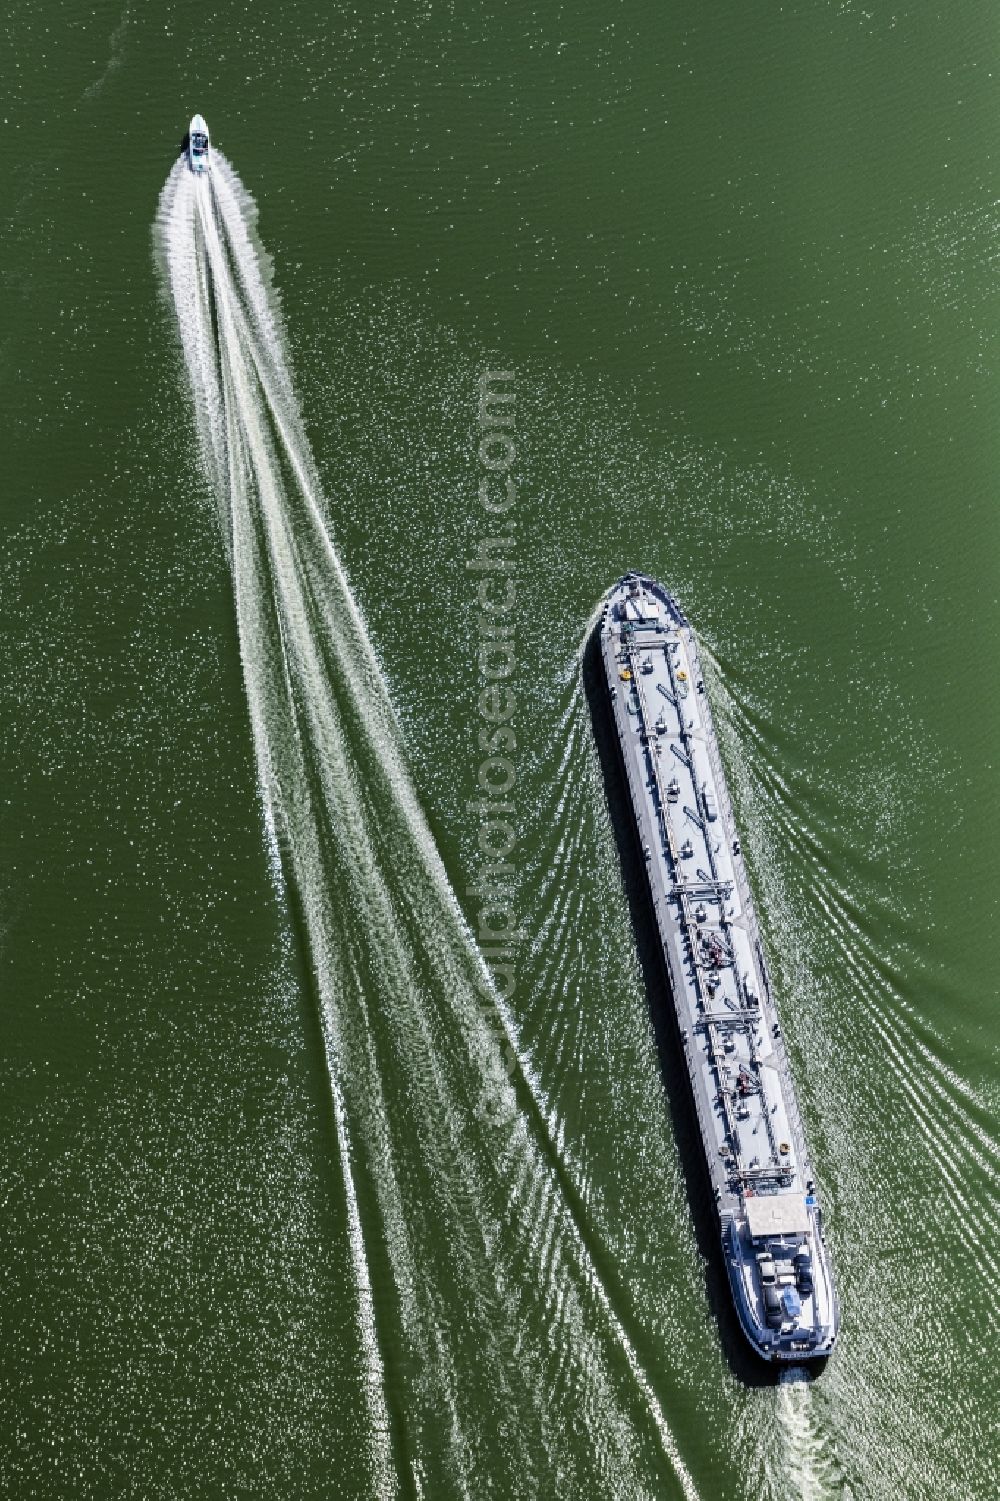 Aerial image Koblenz - Ships and barge trains inland waterway transport in driving on the waterway of the river Mosel, welcher gerade von einem Sportboot ueberholt wird in Koblenz in the state Rhineland-Palatinate, Germany